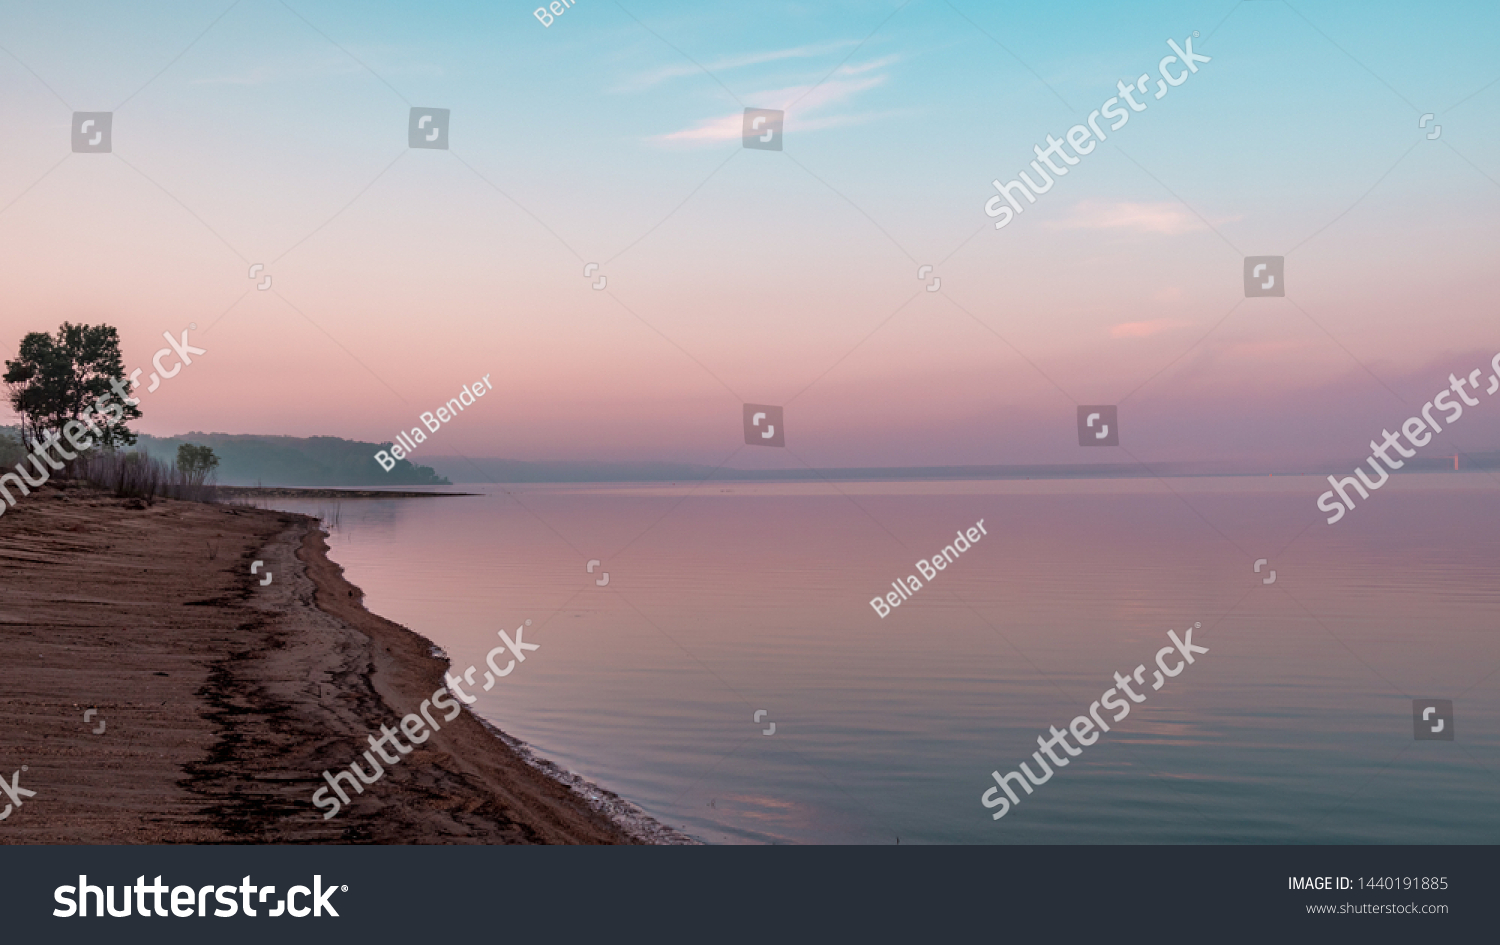 Shoreline and reflection of pink clouds on a lake. Saylorville Lake, near Polk City, Iowa, USA. Blue hour, fog in the distance, cotton candy clouds, sunrise in the Midwest.  #1440191885